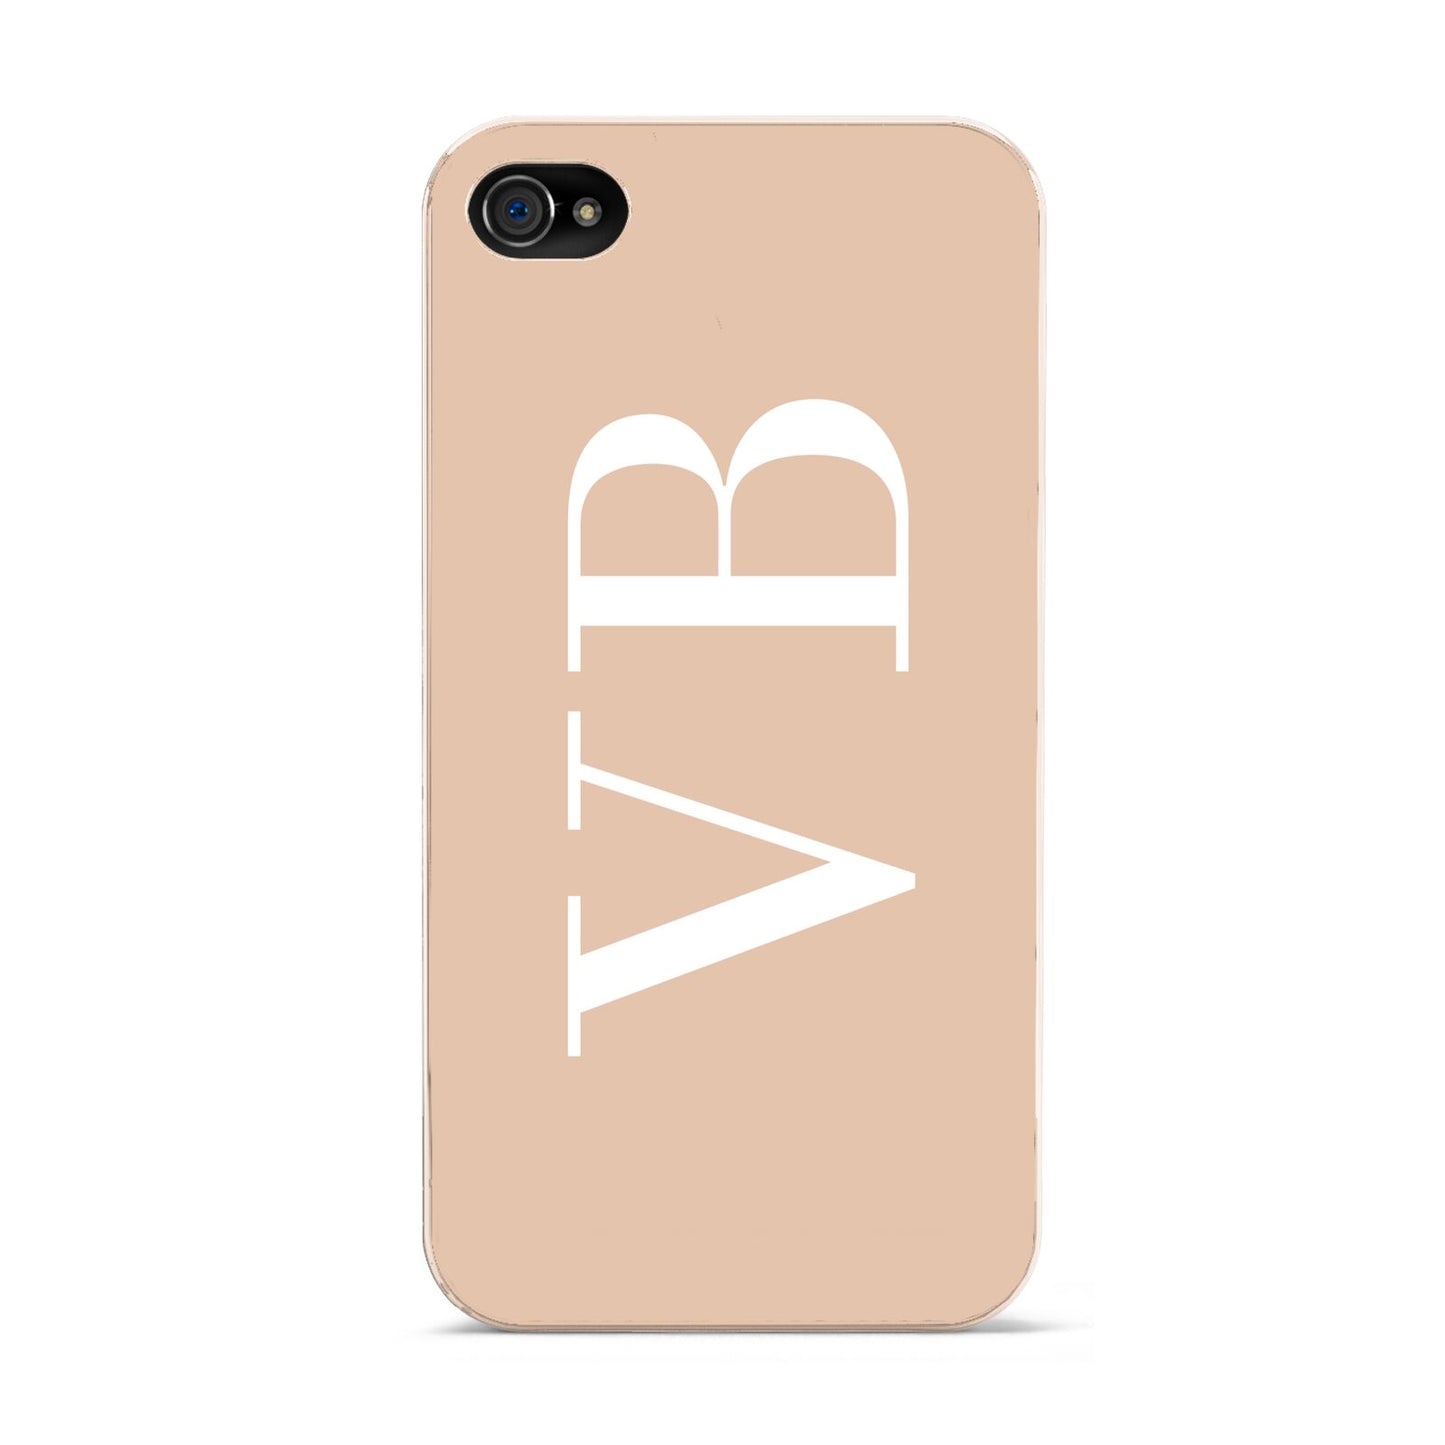 Nude And White Personalised Apple iPhone 4s Case